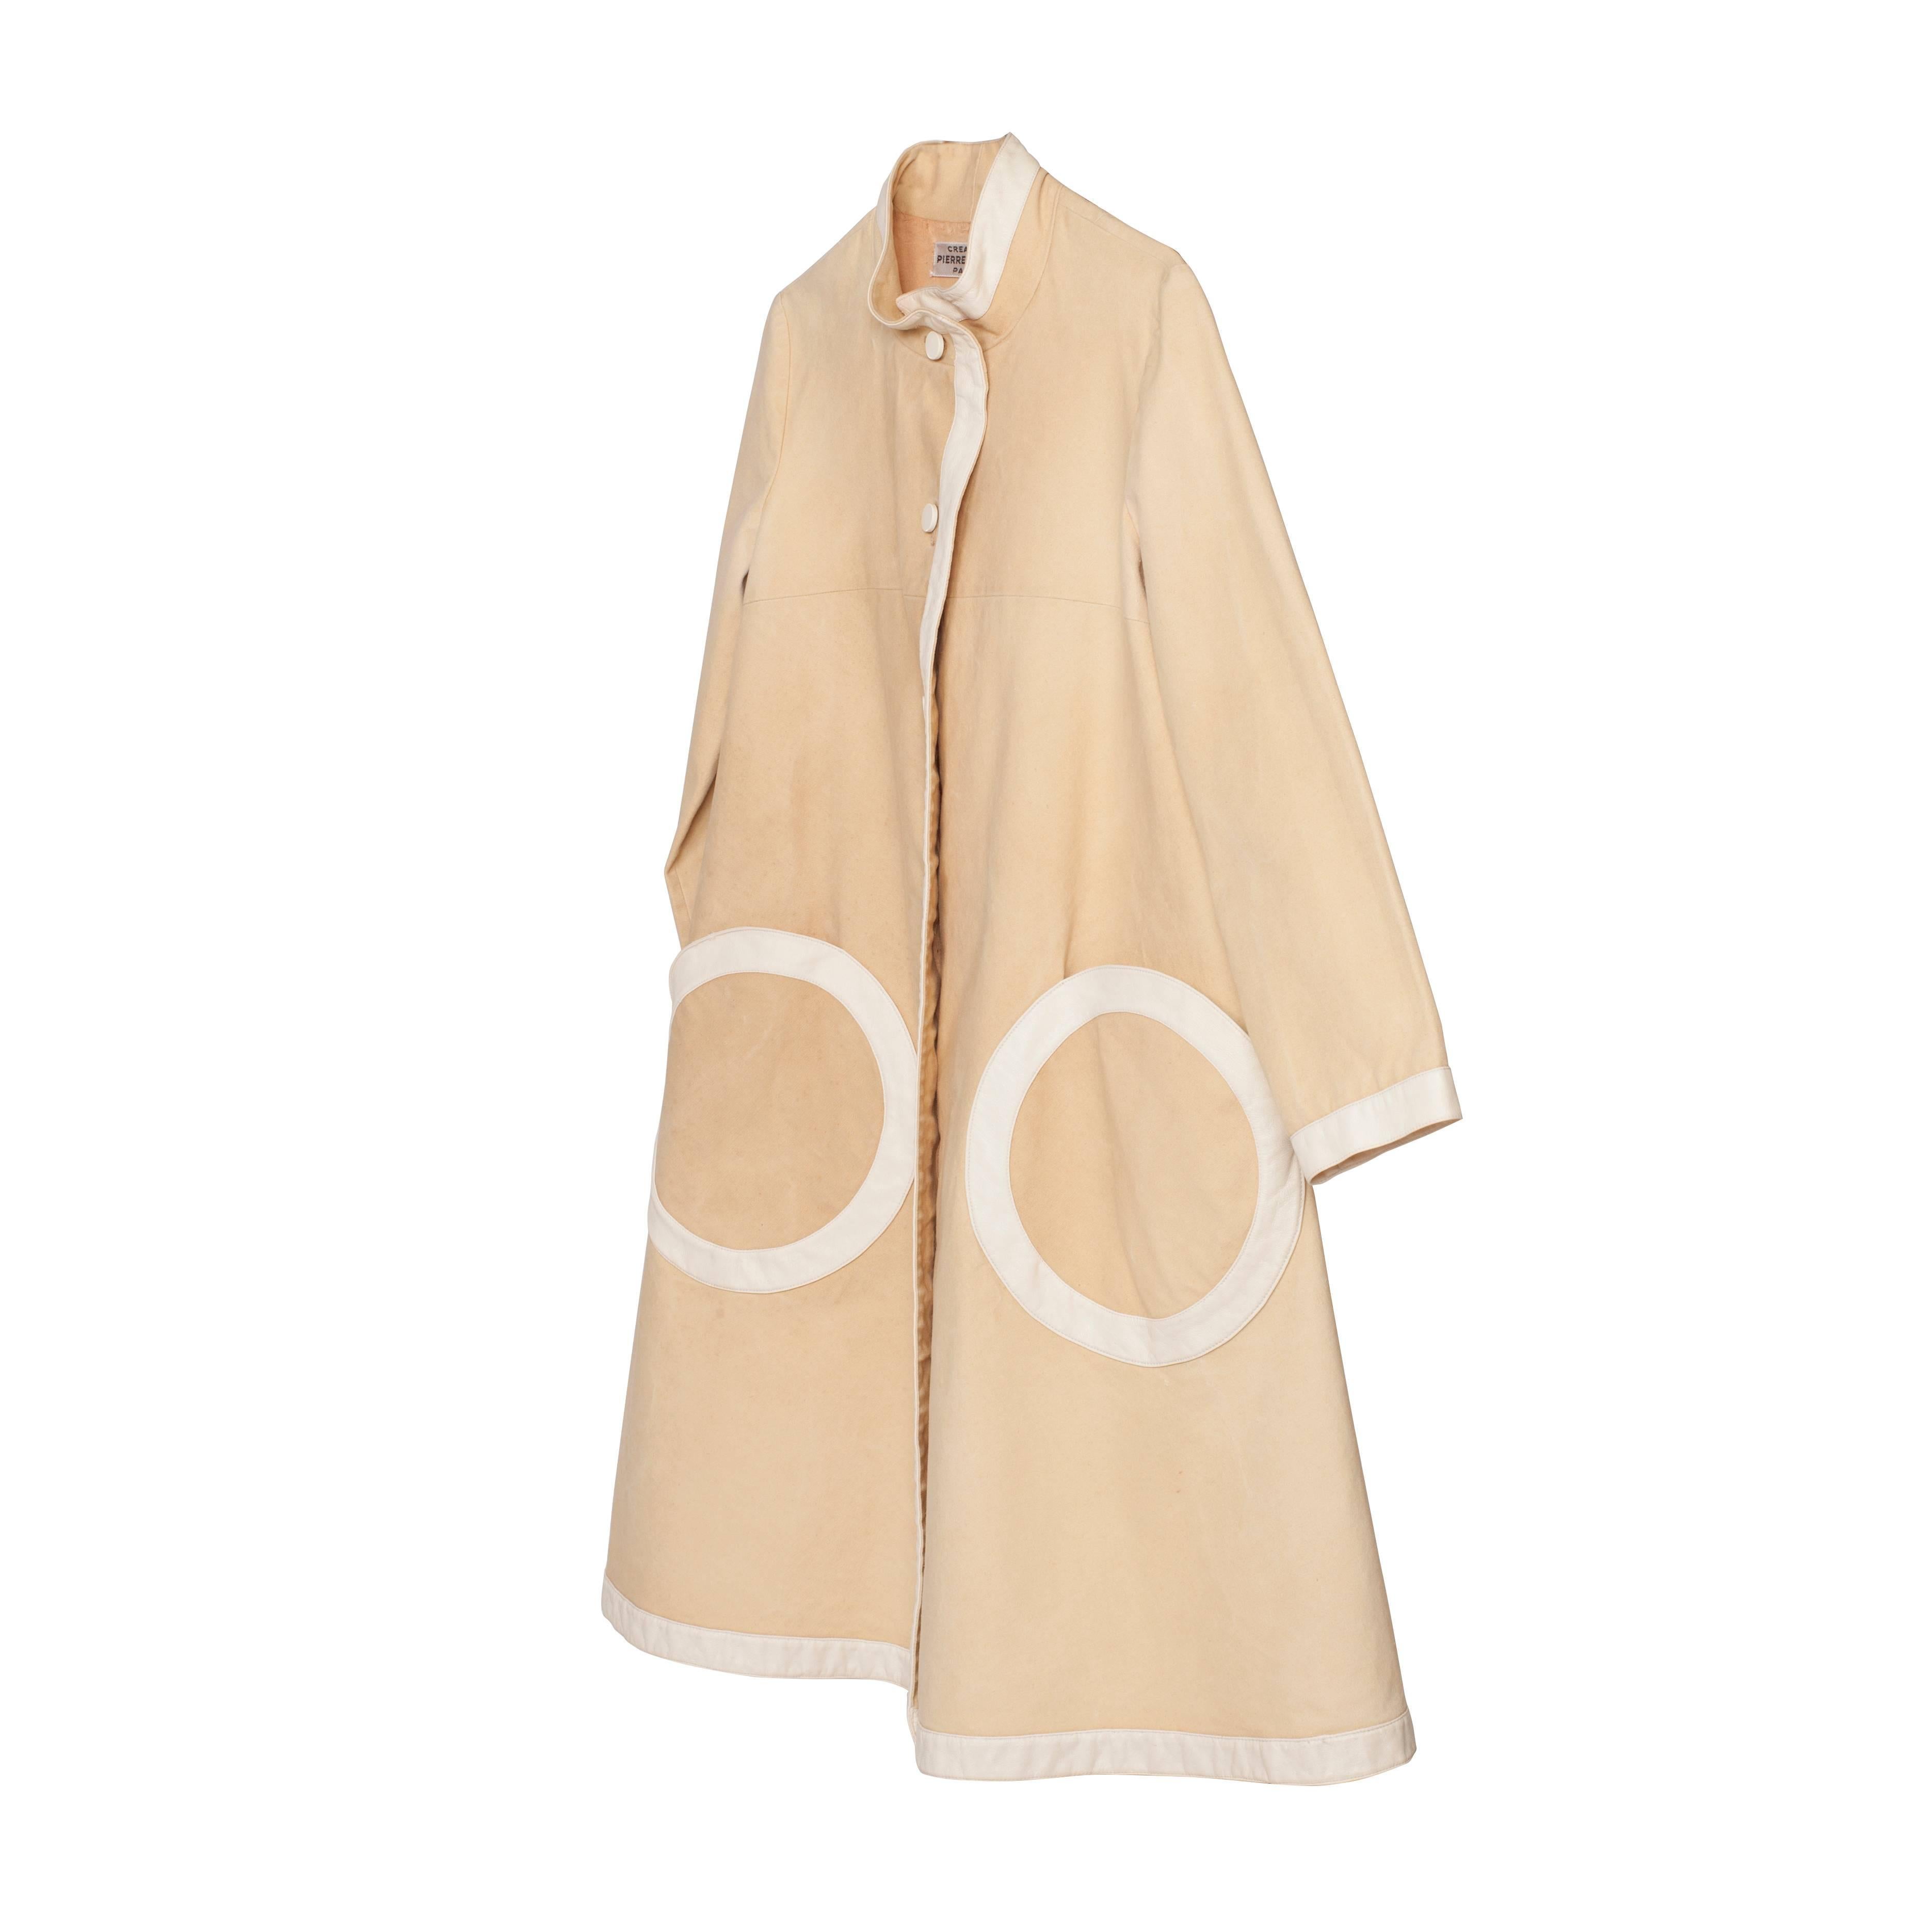 Pierre Cardin Iconic A-line swing coat from 1960s. 
Light beige cotton canvas with white leather piping hem and cuffs, large circle patch pockets in the same leather.
It fits like US 4-6, EU 6
Measurements :
Shoulder : 39 cm
Under arm : 91